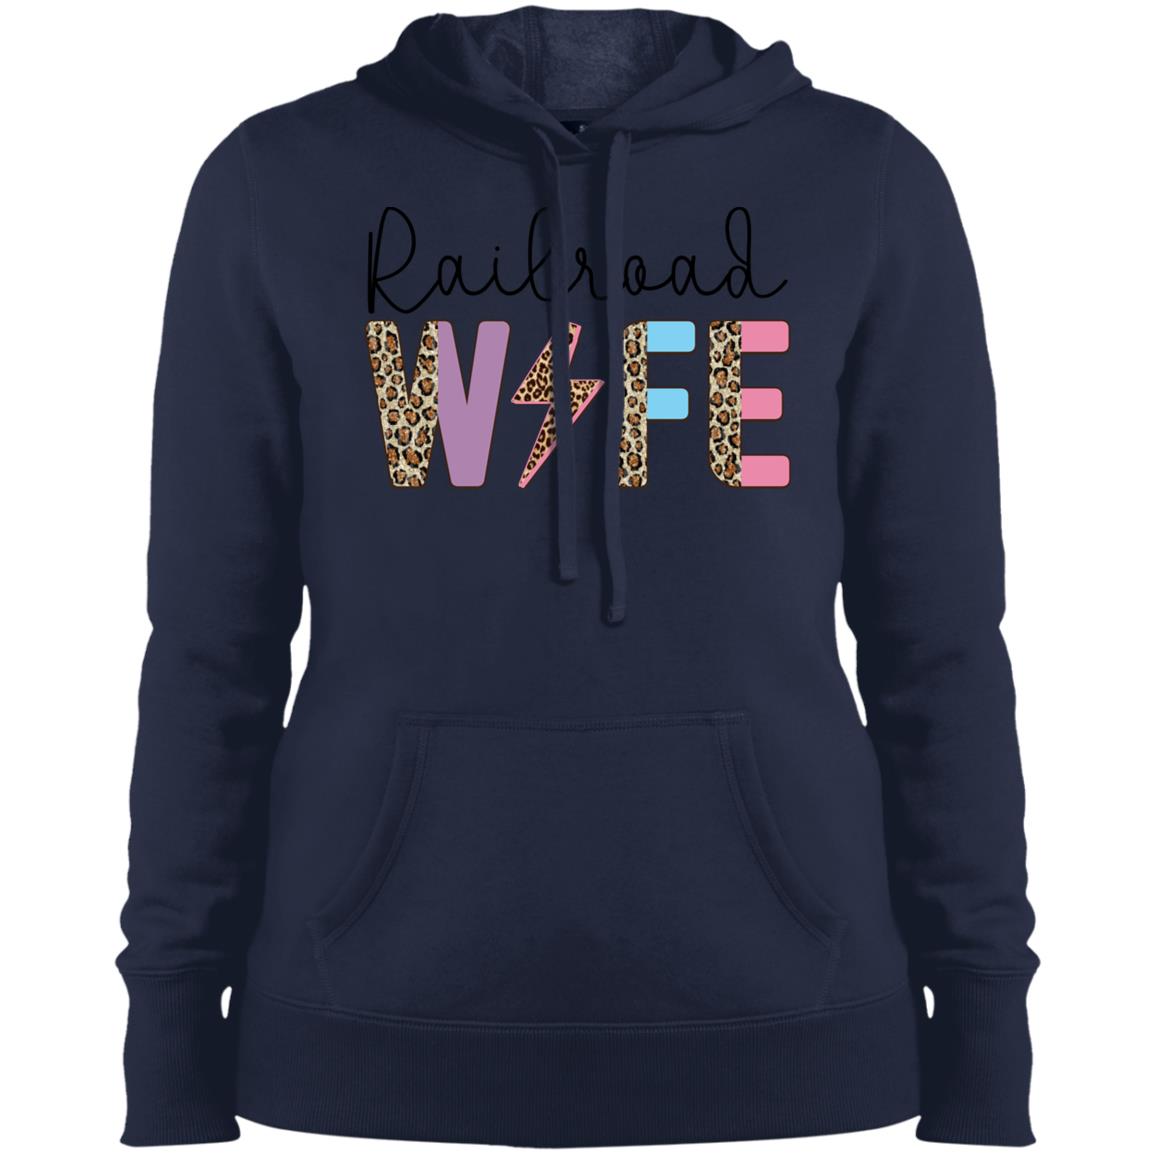 Railroad Wife Expensive, Difficult, and Talks Back Ladies' Pullover Hooded Sweatshirt